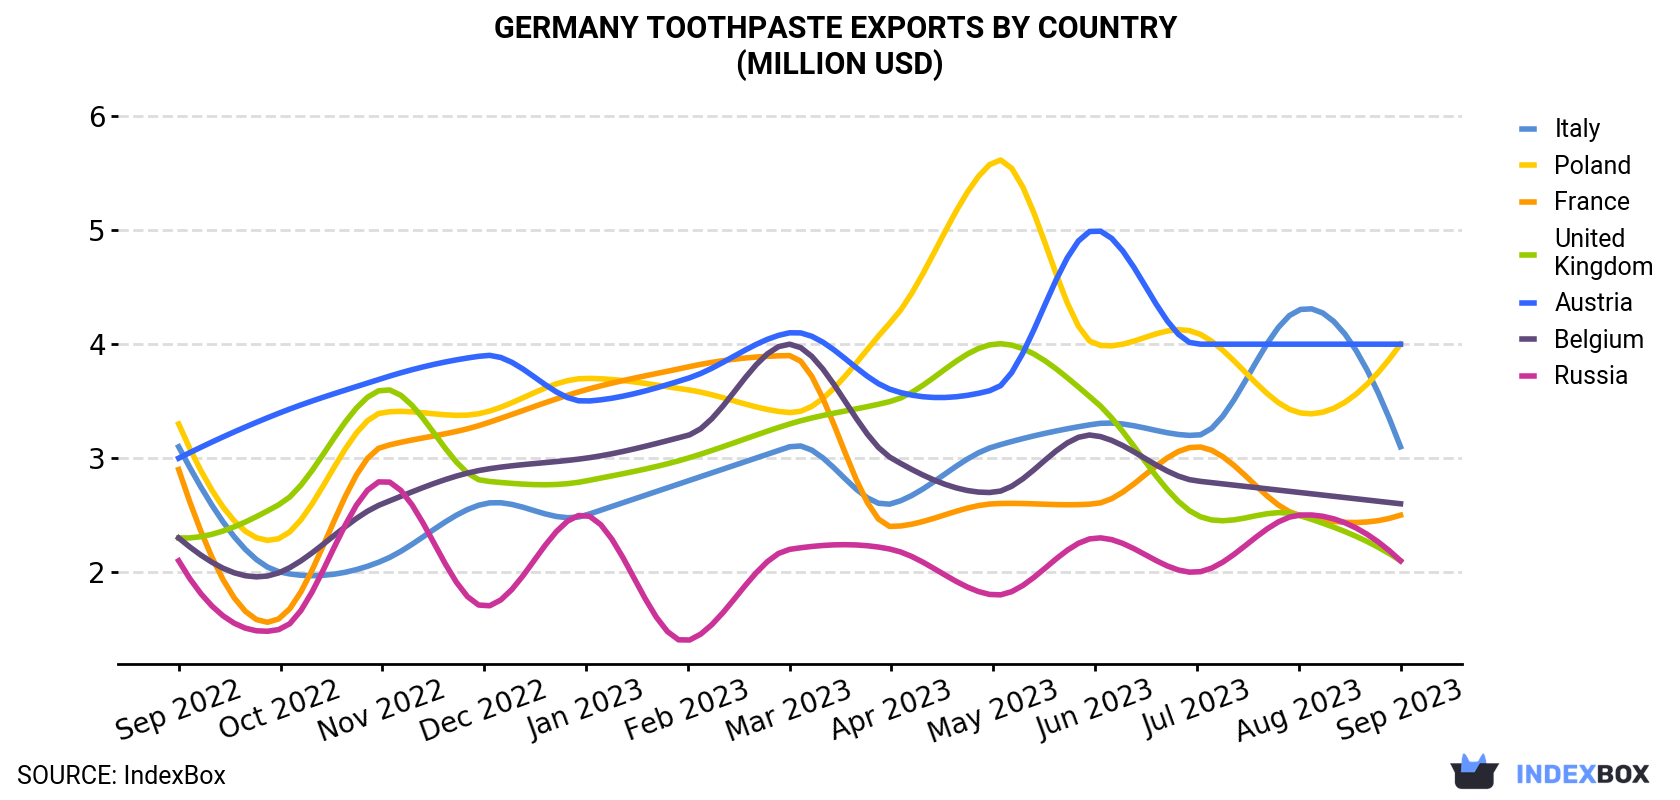 September 2023 Sees $37M Decline in Germany's Toothpaste Exports - News ...